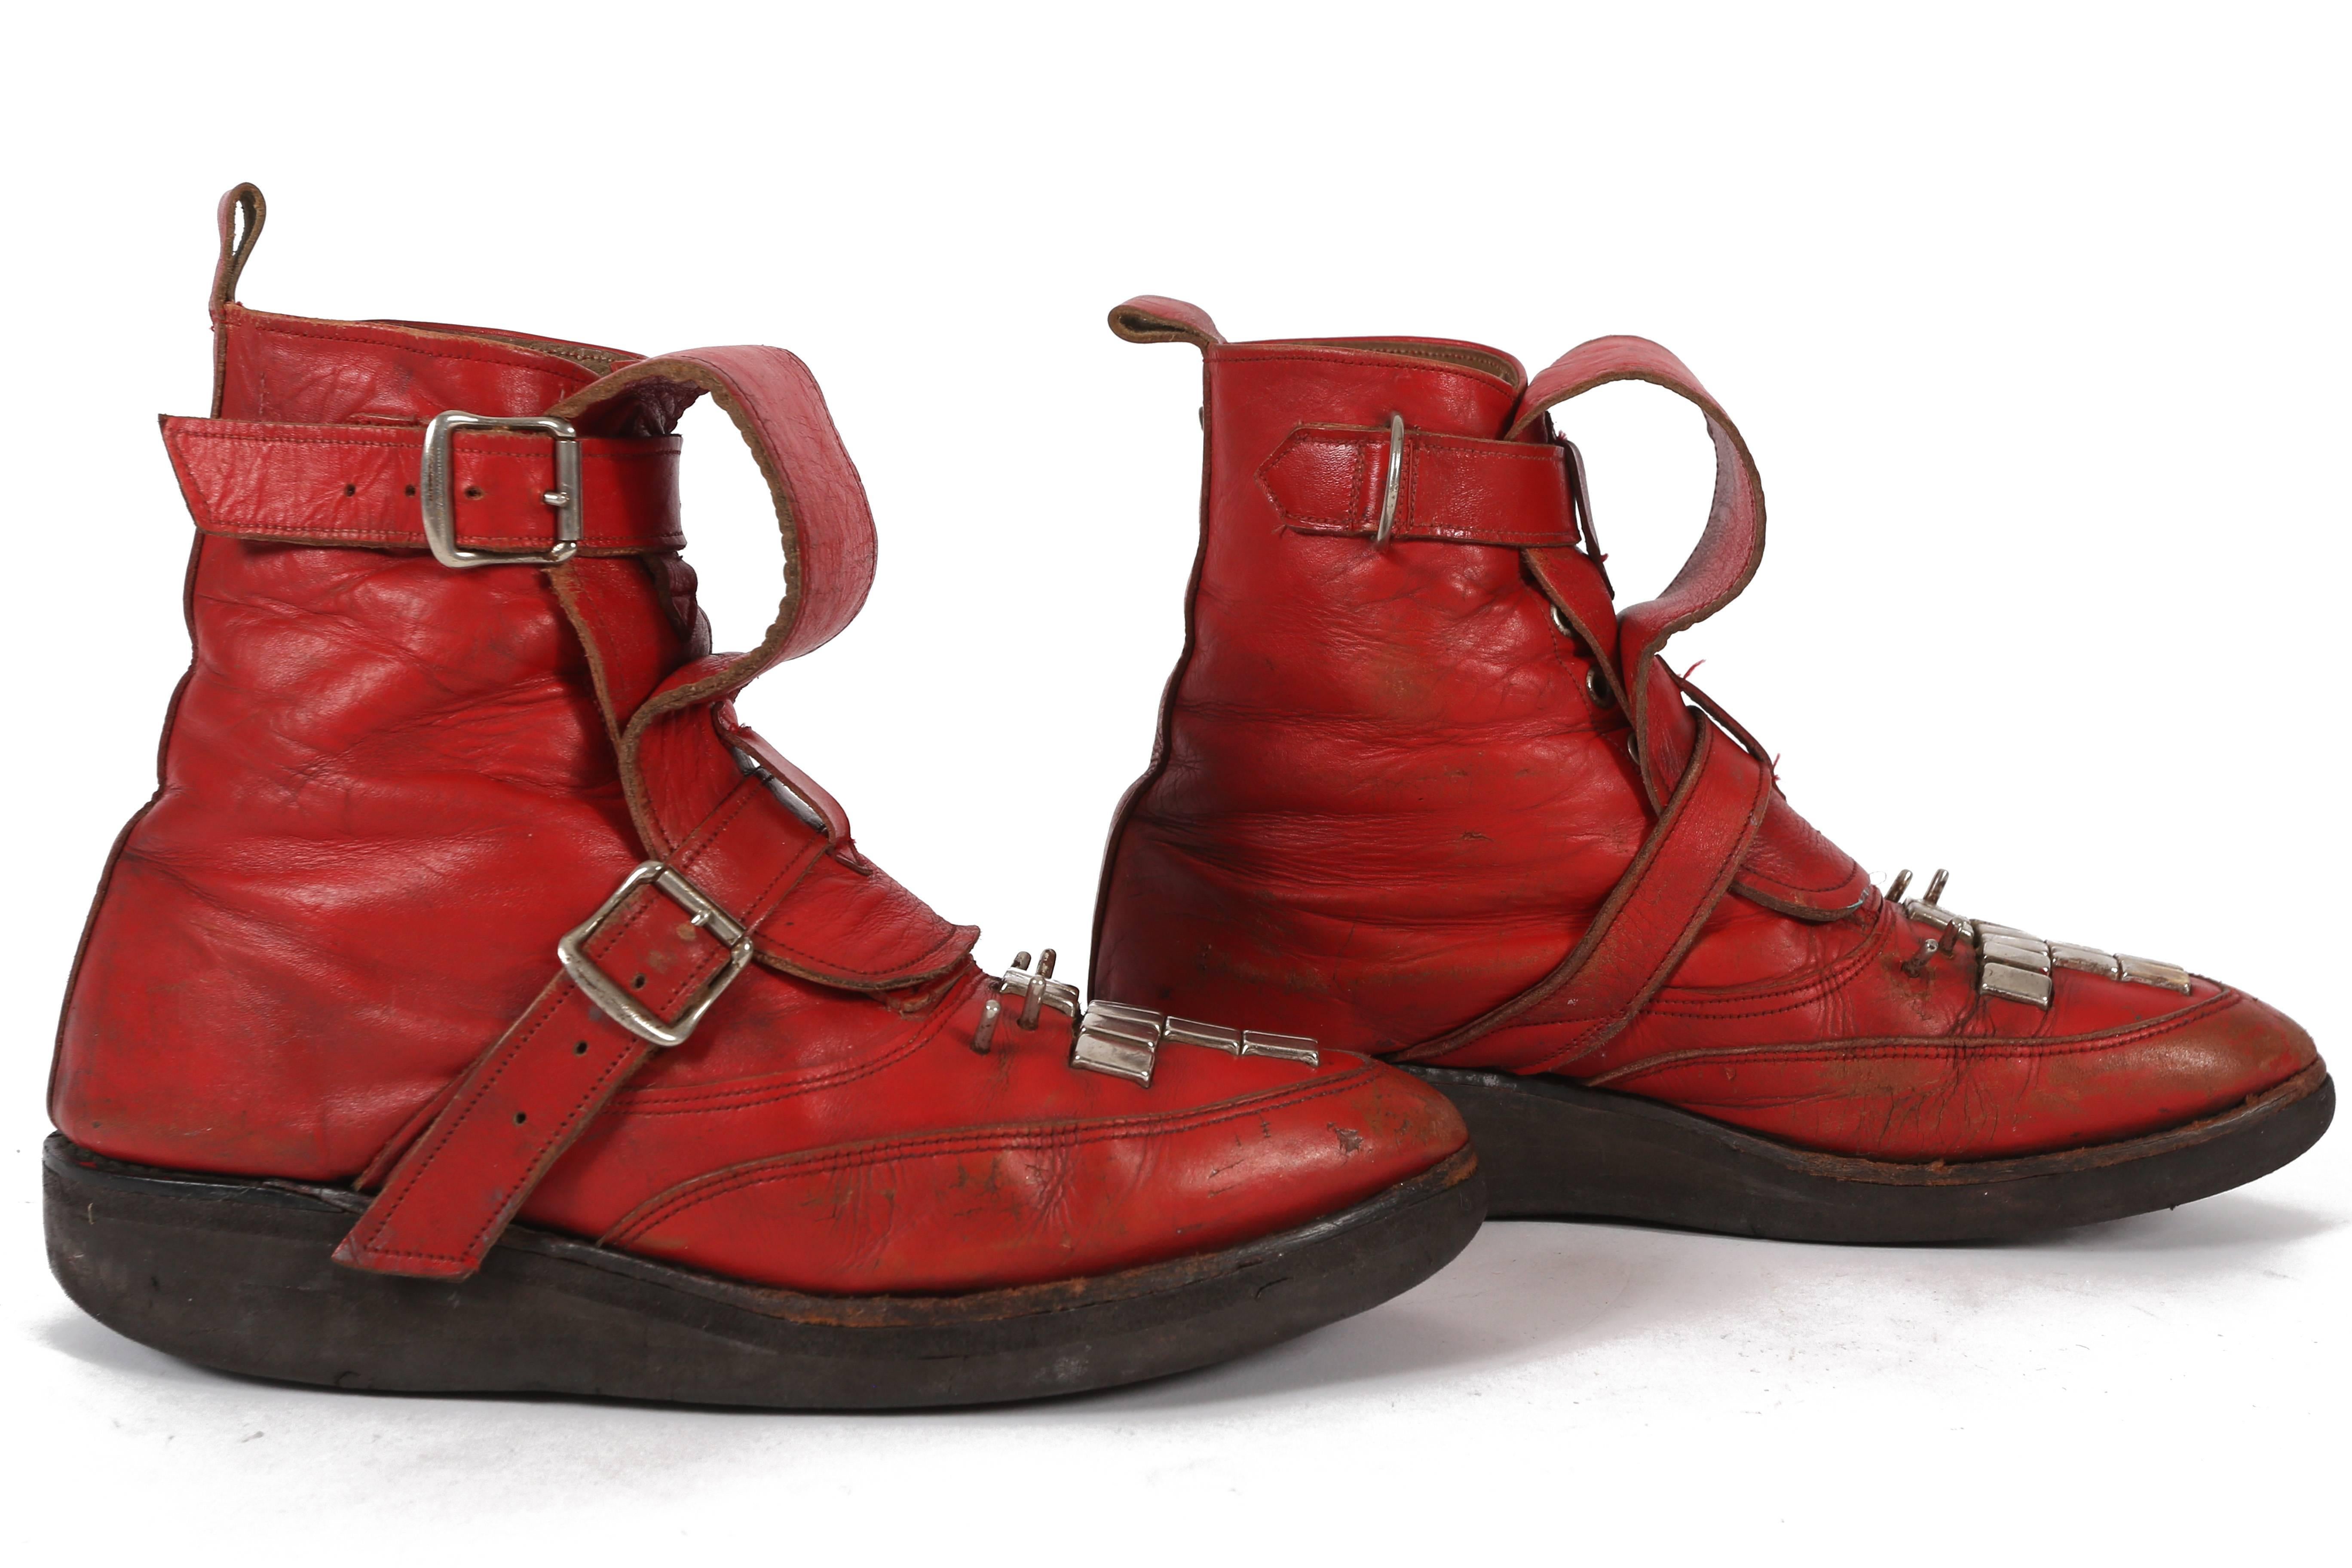 An extremely rare pair of SEDITIONARIES ankle boots by Vivienne Westwood and Malcolm McLaren. Red leather, studded and fastening with buckles, with brothel-creeper soles and original label. 